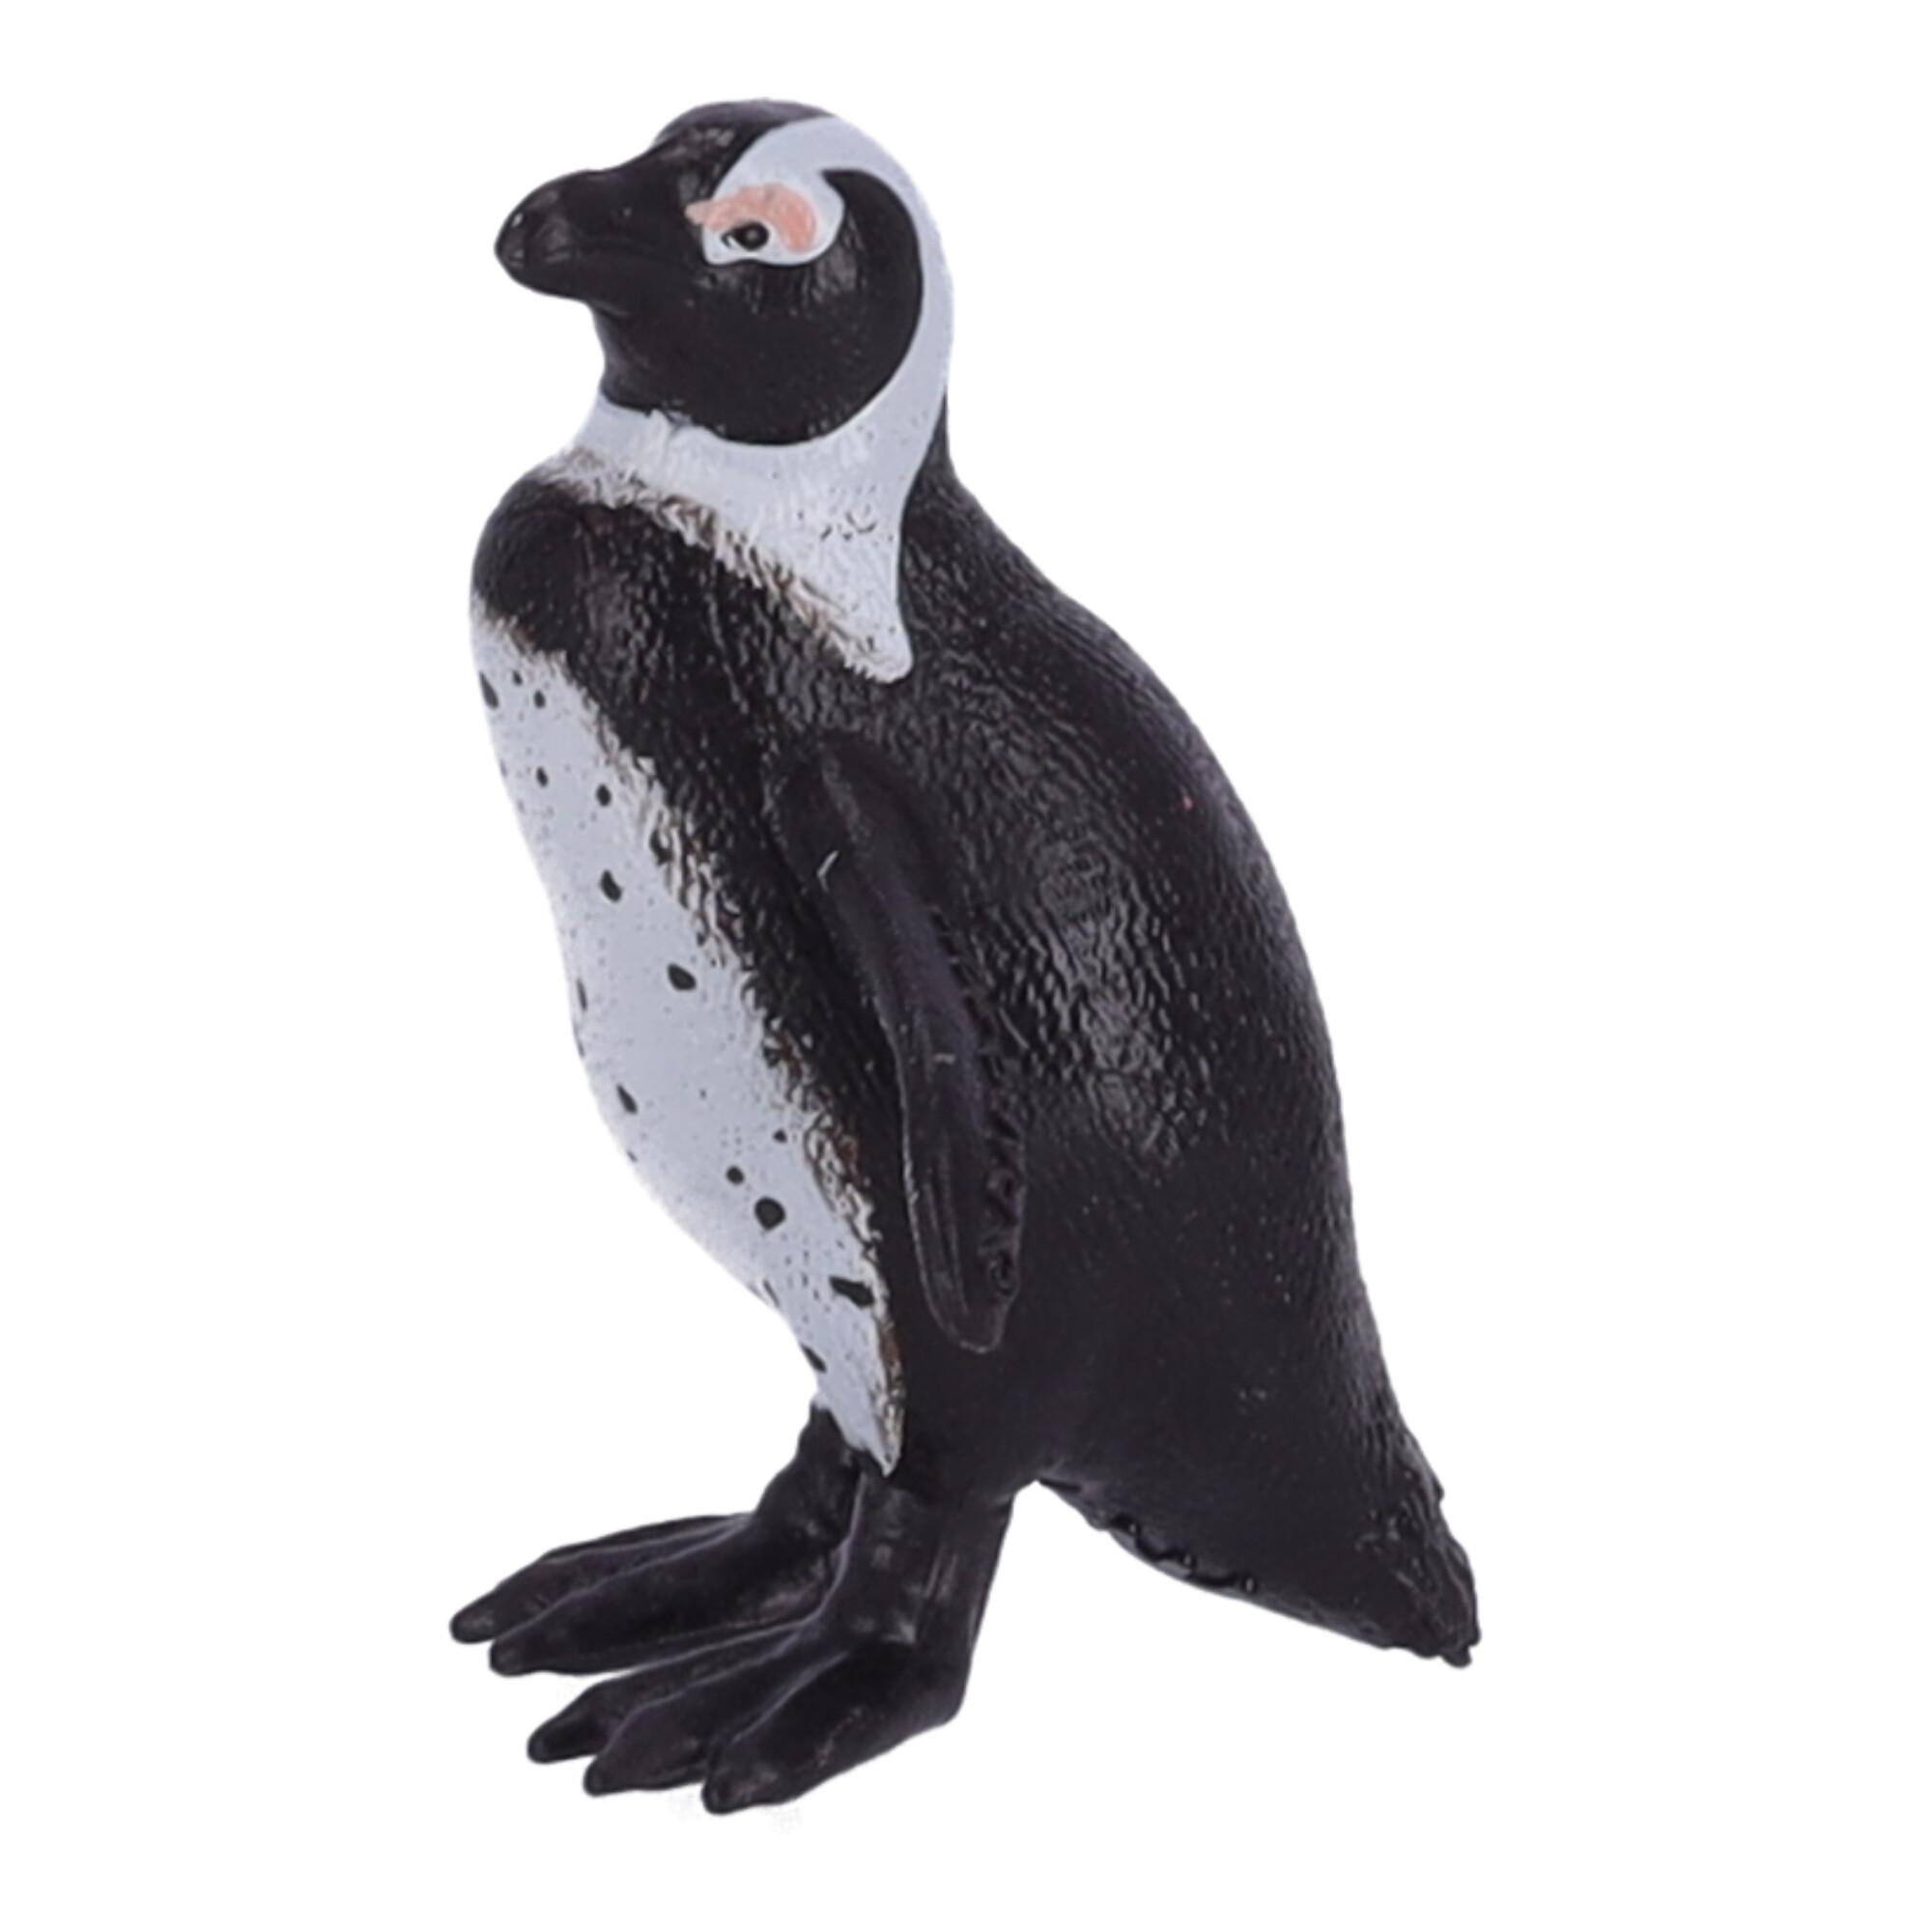 Collectible figurine Pengwin, Papo